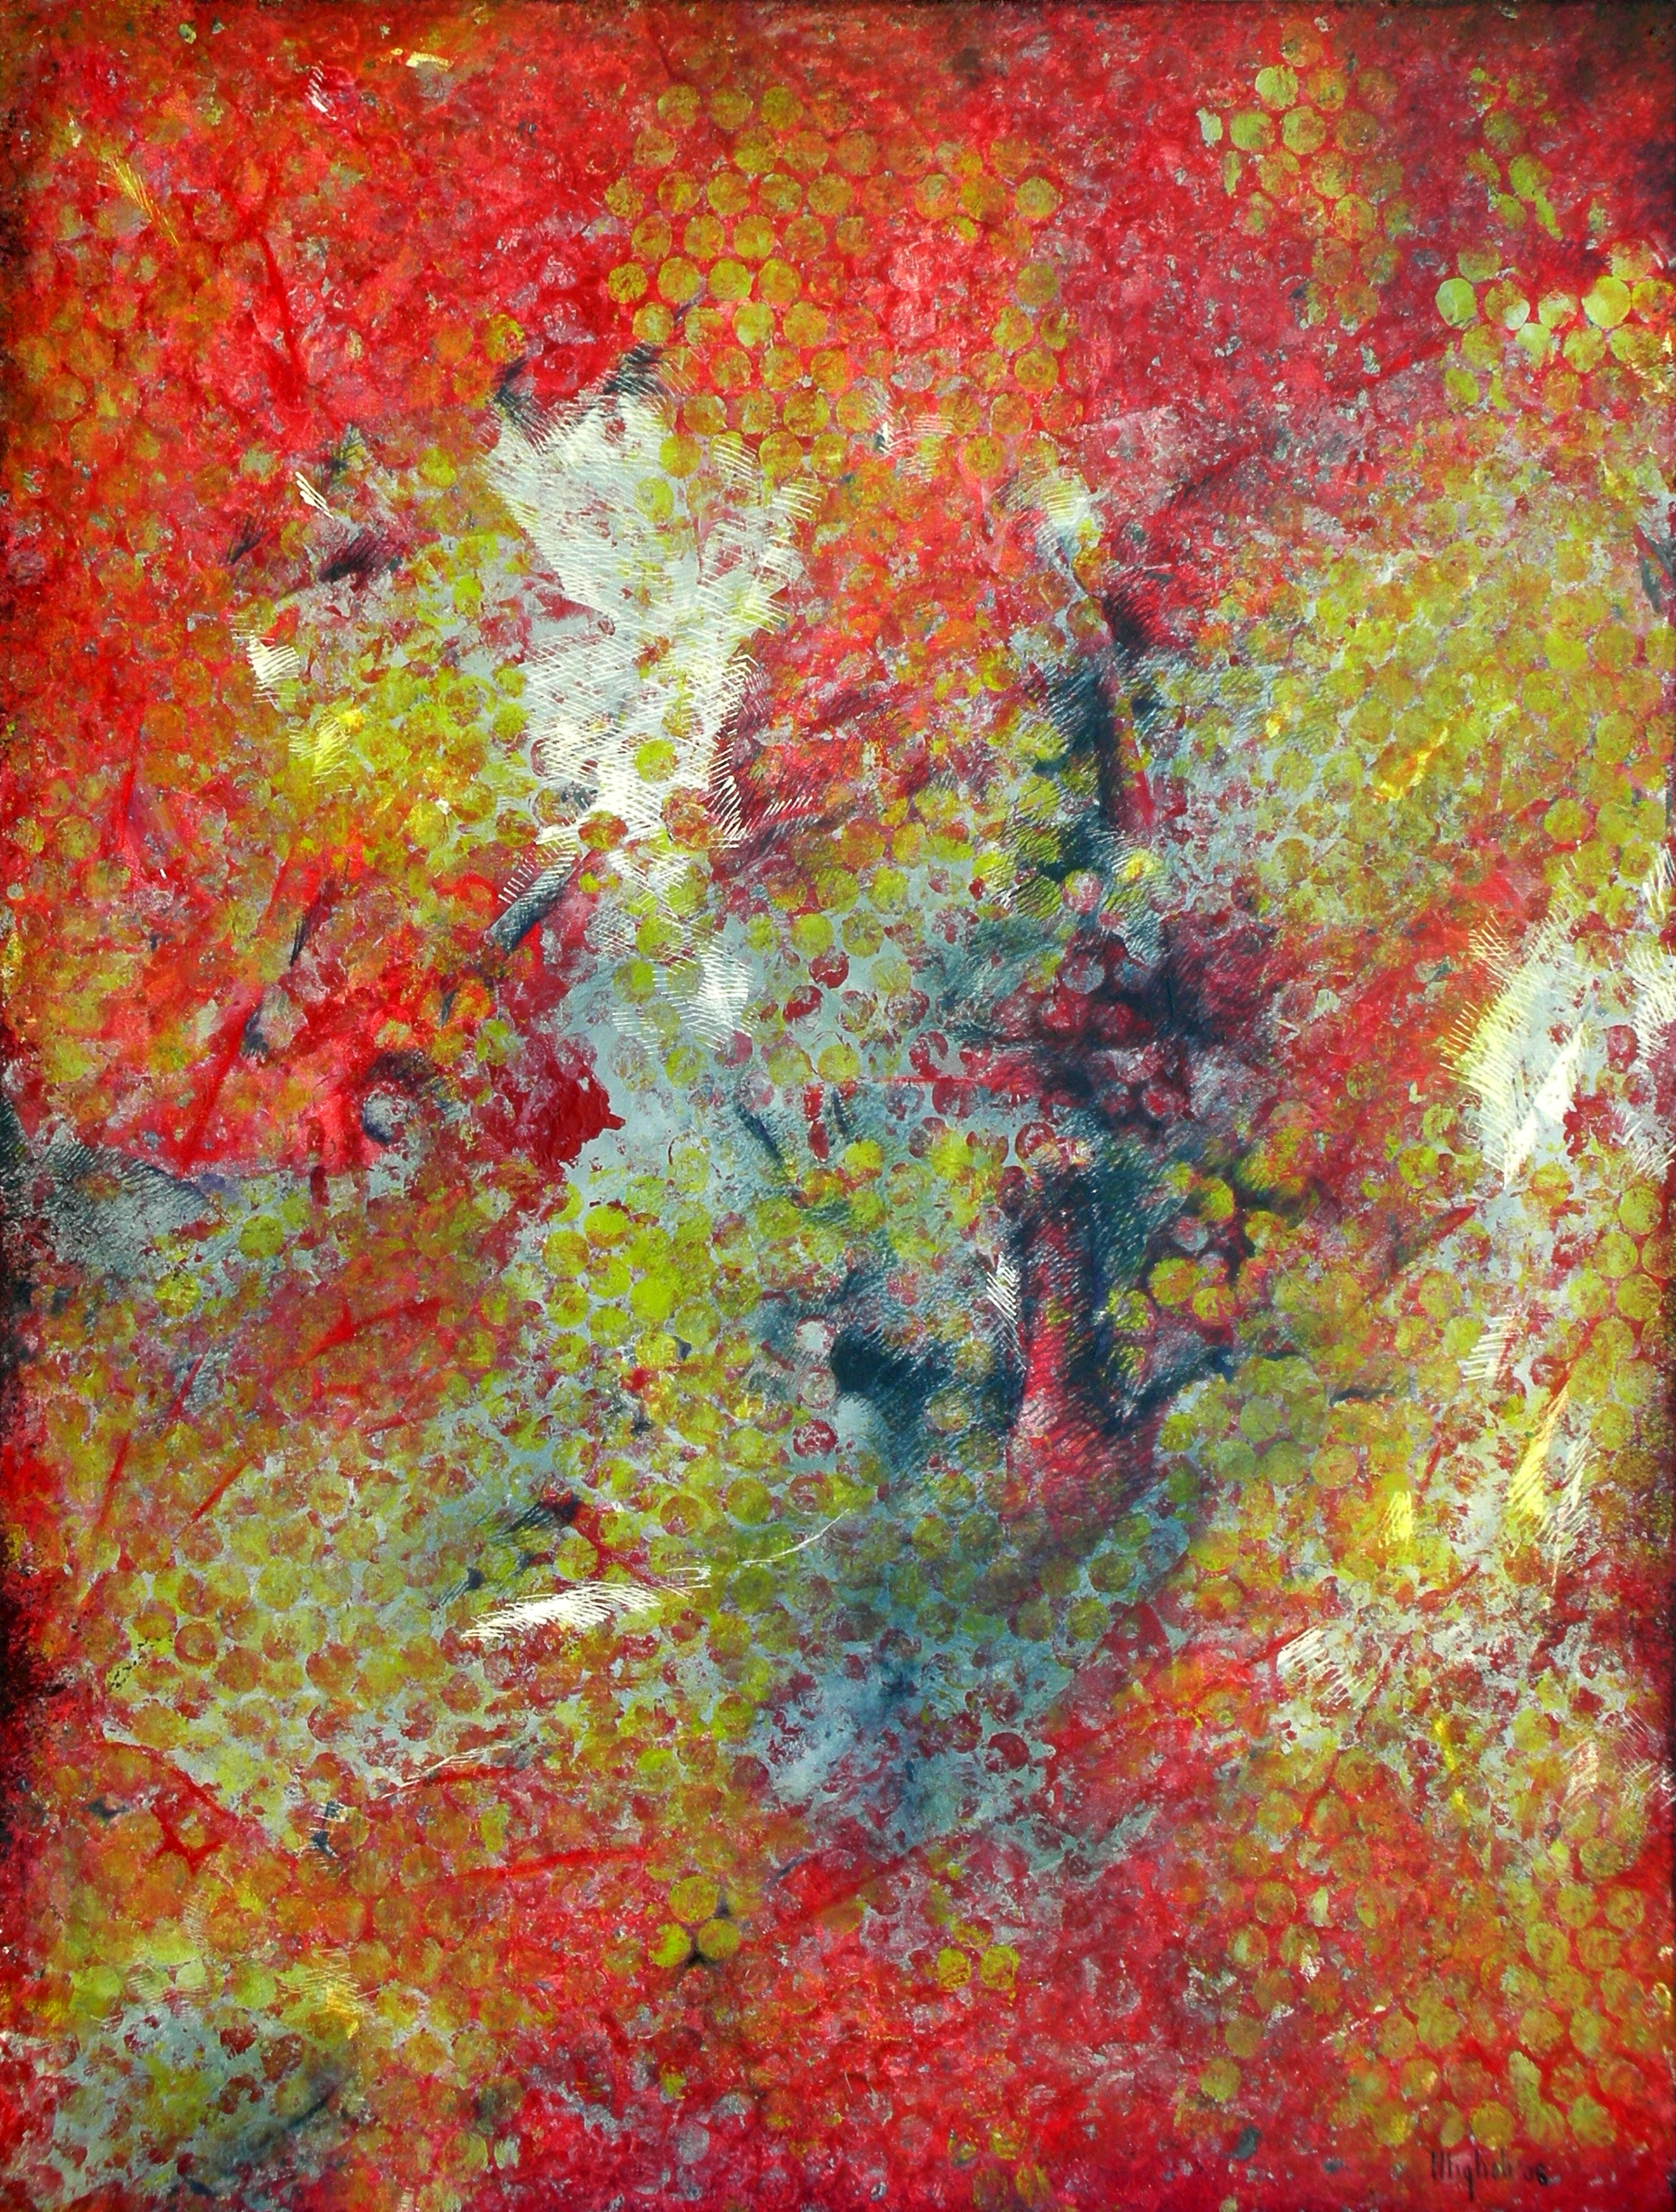  Red Quantum, 2008 48 x 36 inches Acrylic on canvas 